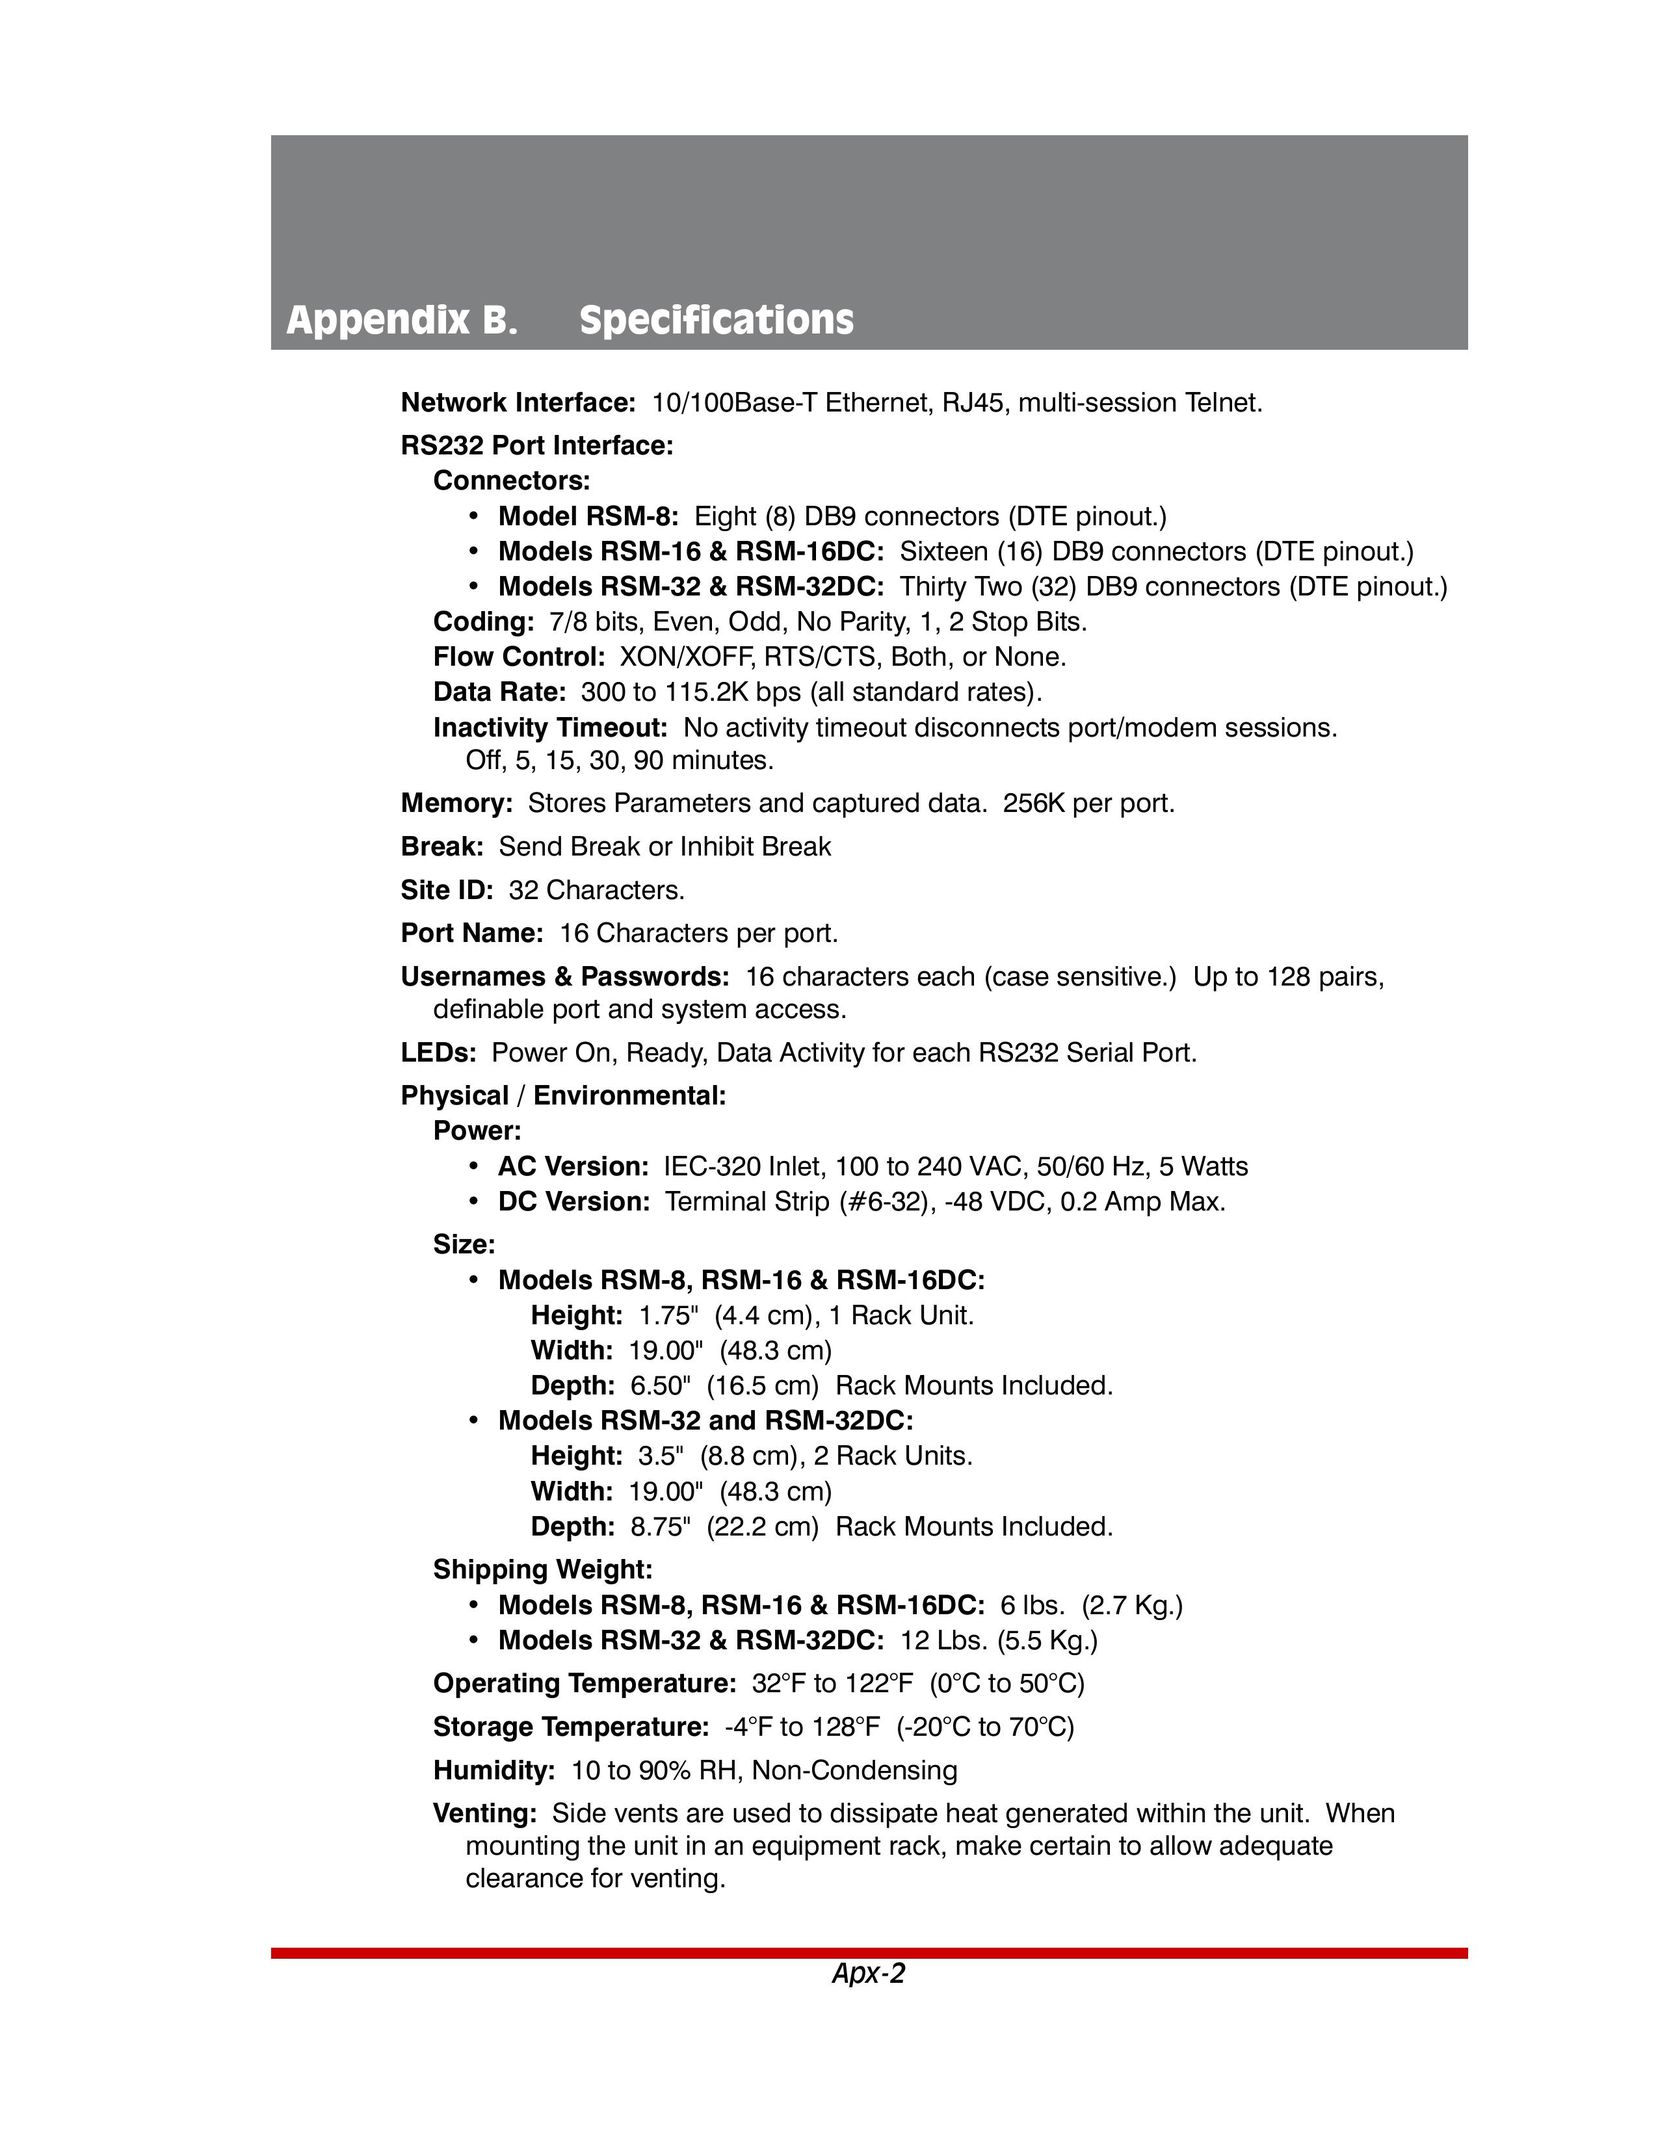 Western Telematic RSM-8 Video Gaming Accessories User Manual (Page 114)